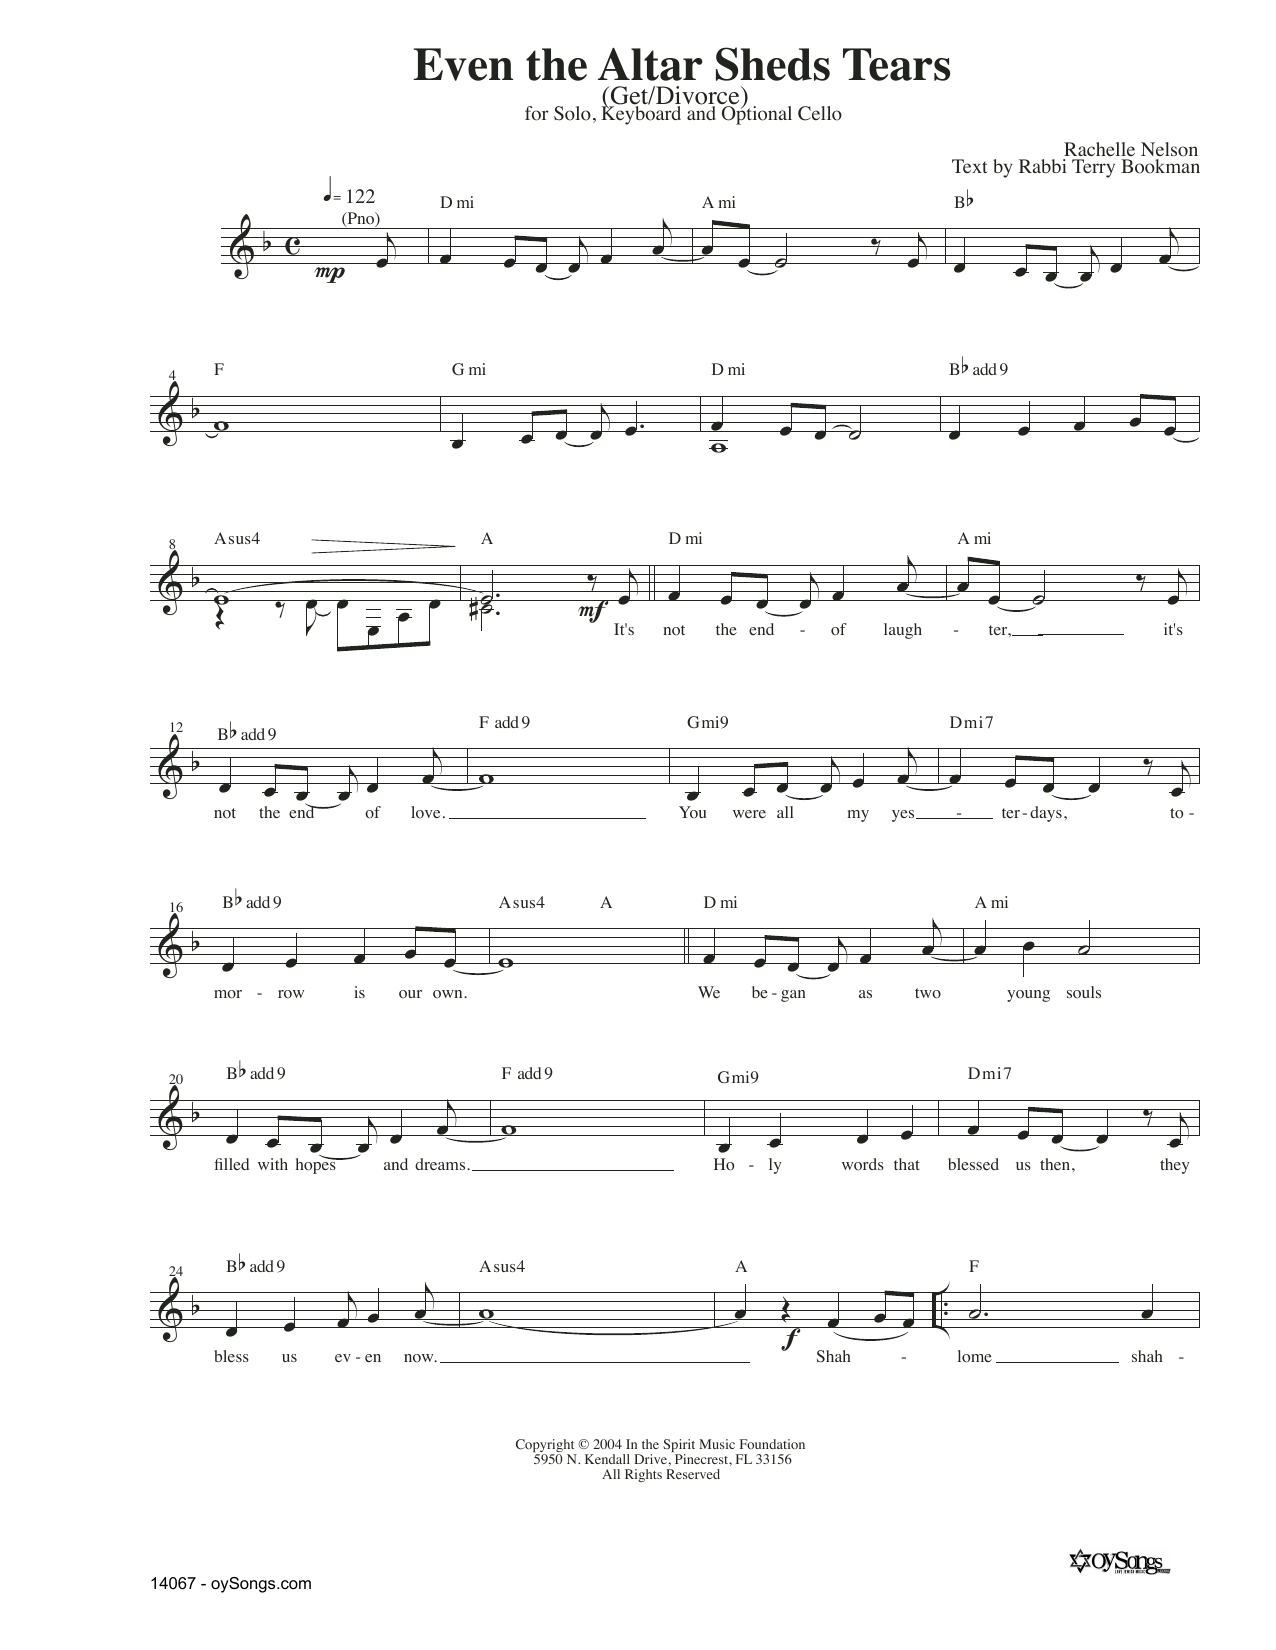 Download Rachelle Nelson Even The Altar Sheds Tears Sheet Music